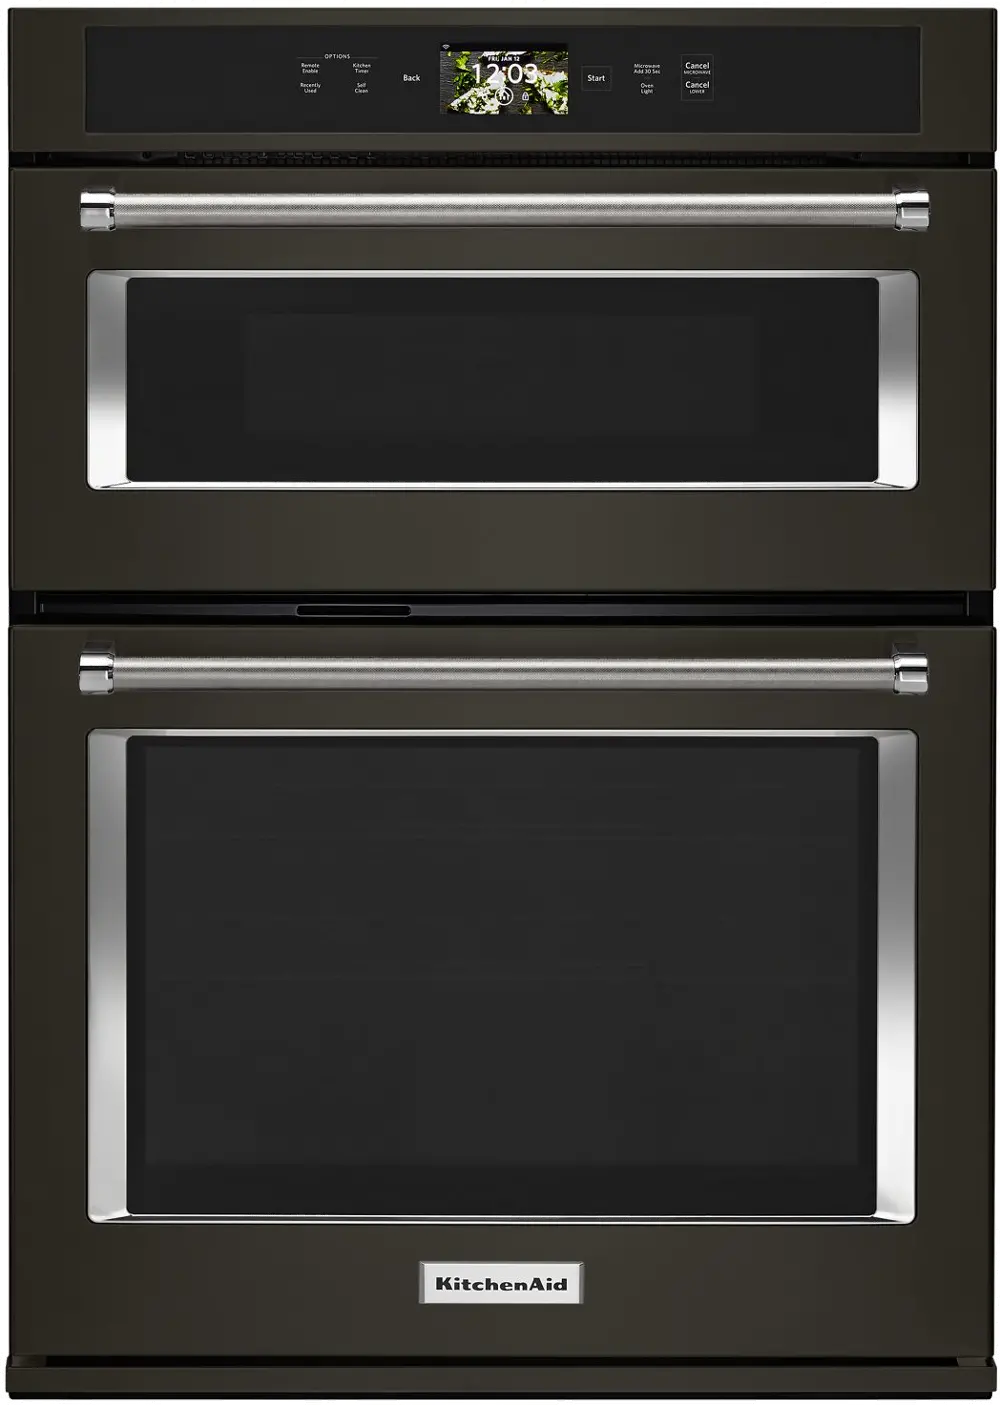 KOCE900HBS KitchenAid 30 Inch Smart Combination Wall Oven with Microwave - 6.4 cu. ft. Black Stainless Steel-1